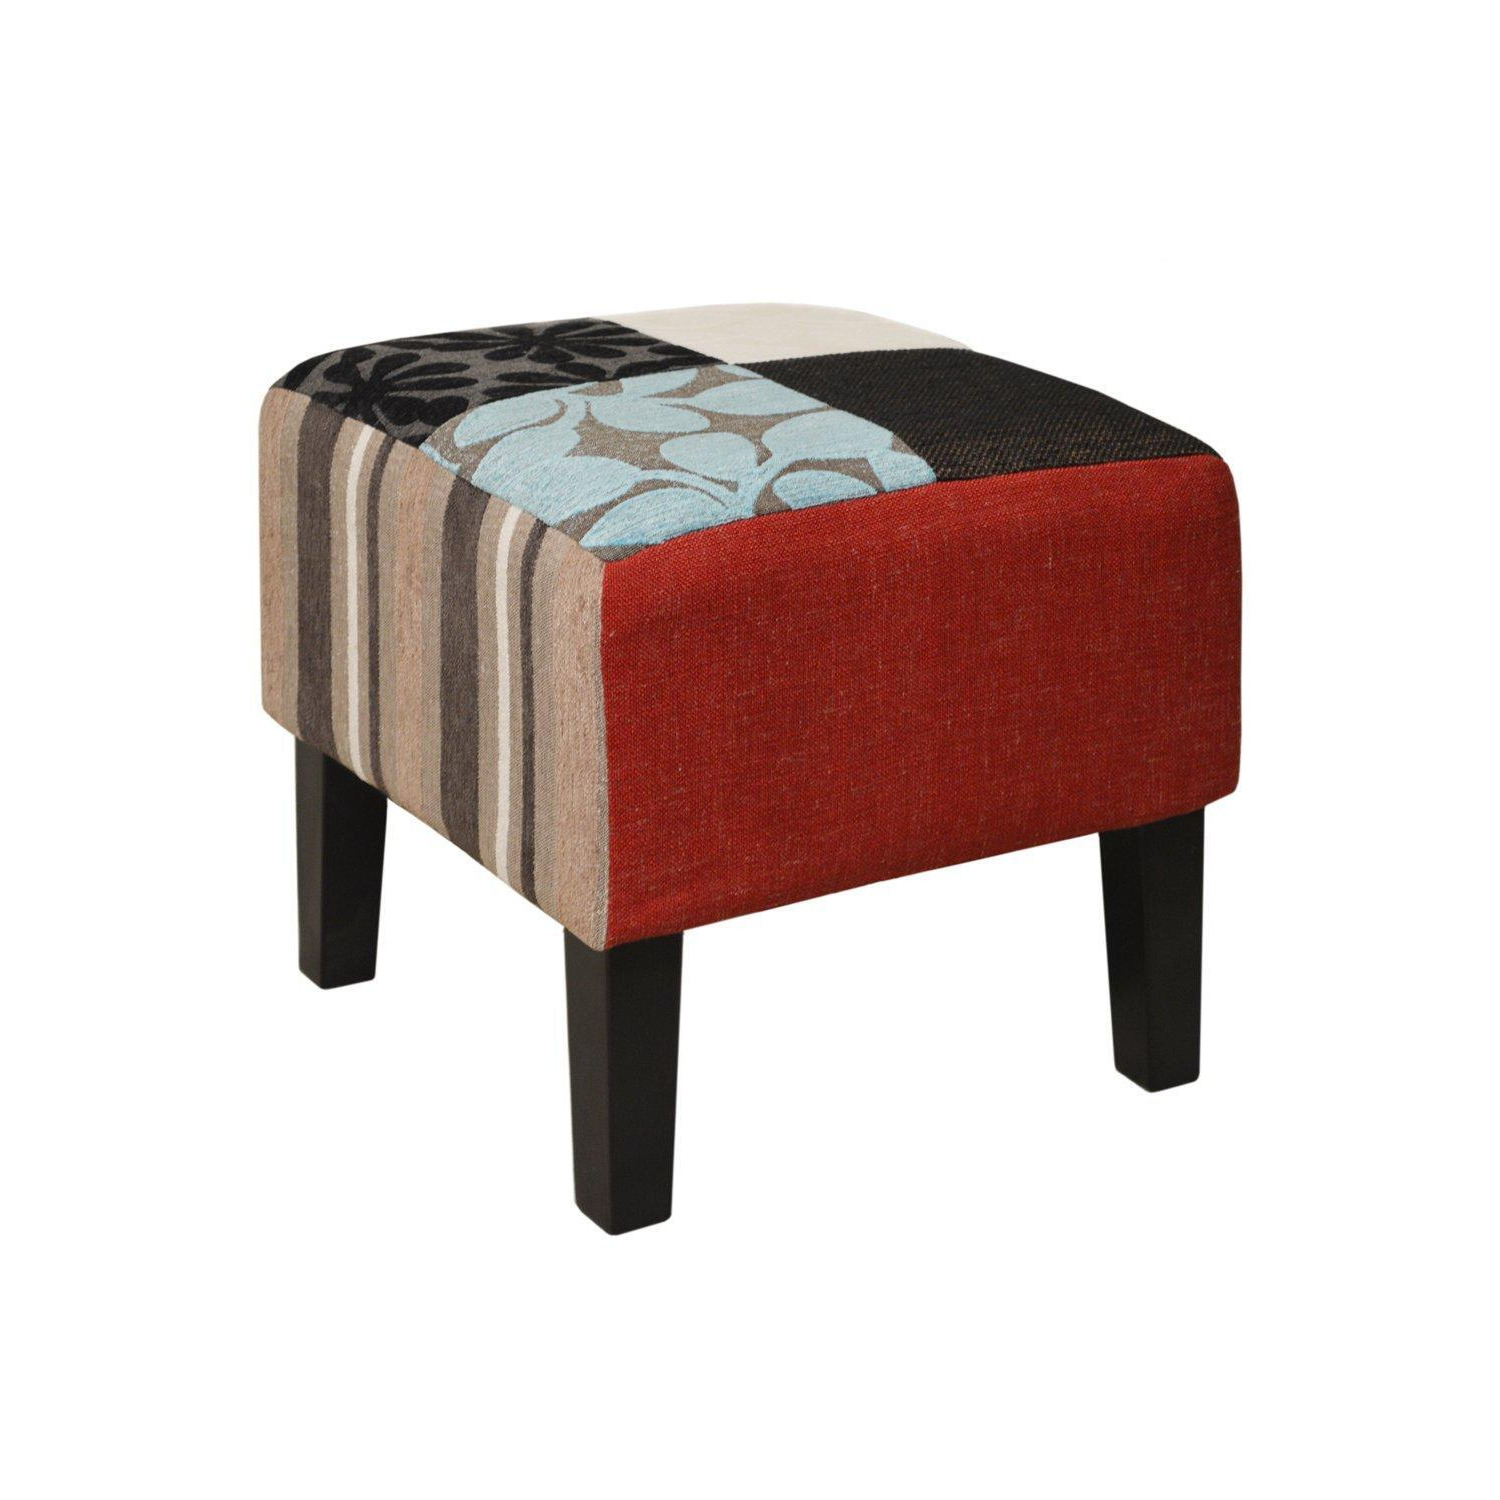 Plush Patchwork - Shabby Chic Square Pouffe Stool  Wood Legs - Blue  Green  Red - image 1